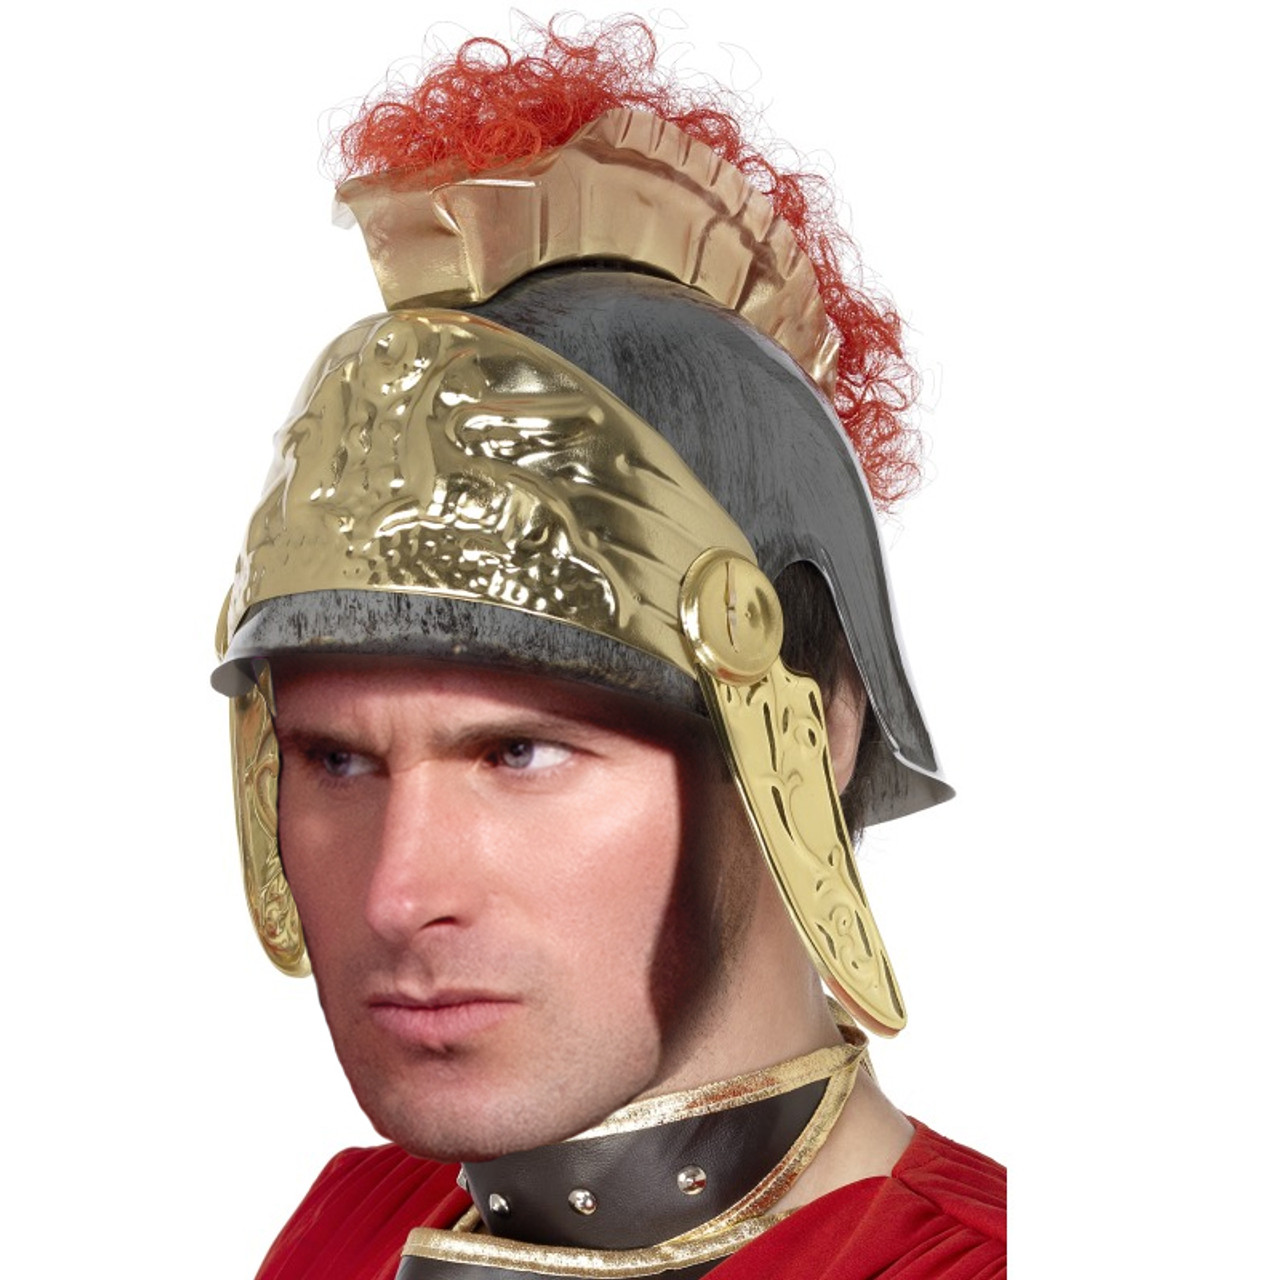 Roman Helmet with Red Feathers 1500